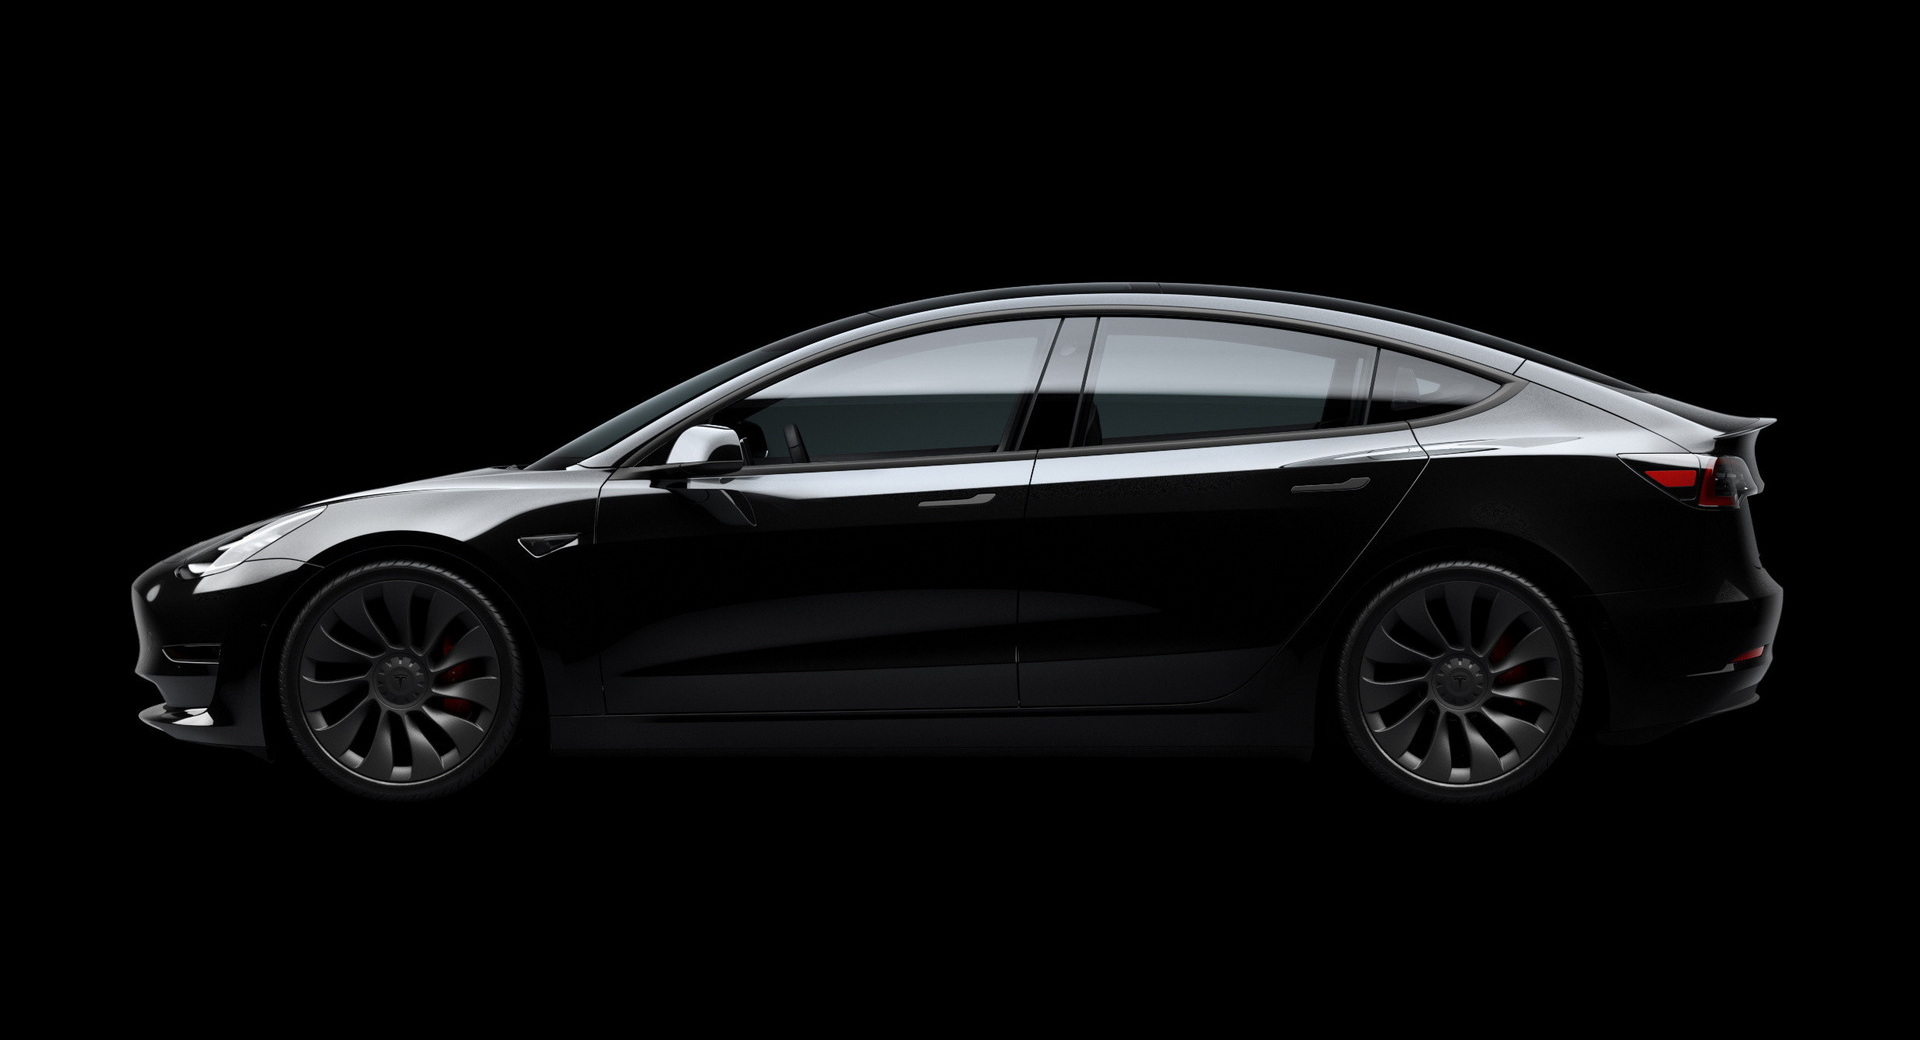 Tesla's refreshed Model 3 is now available in the U.S.